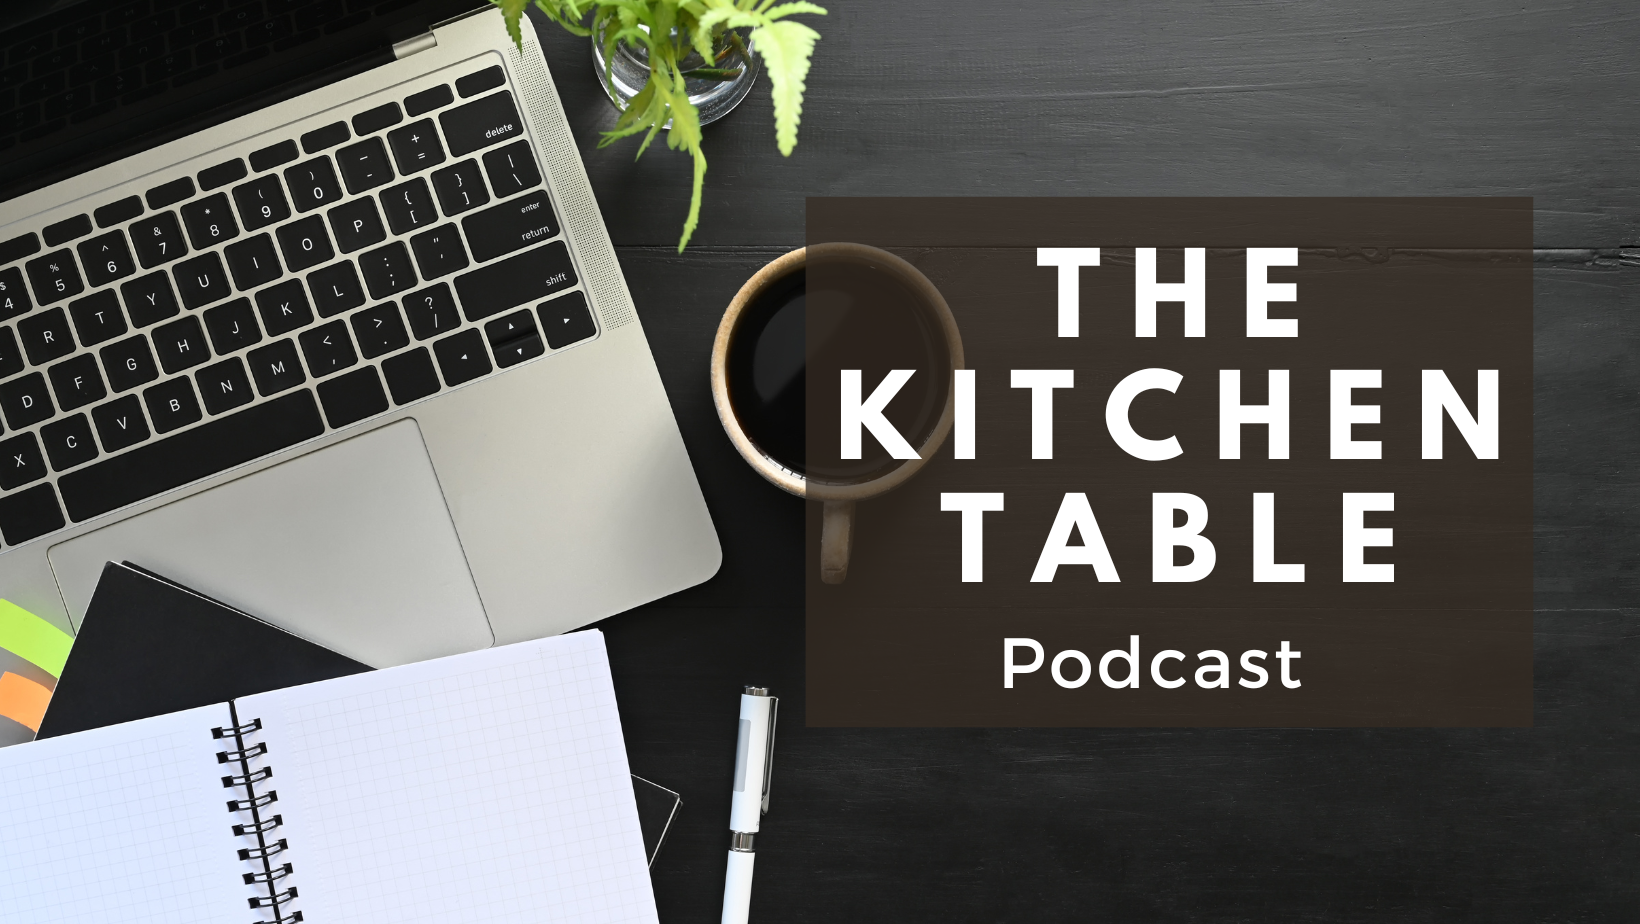 The Kitchen Table Podcast